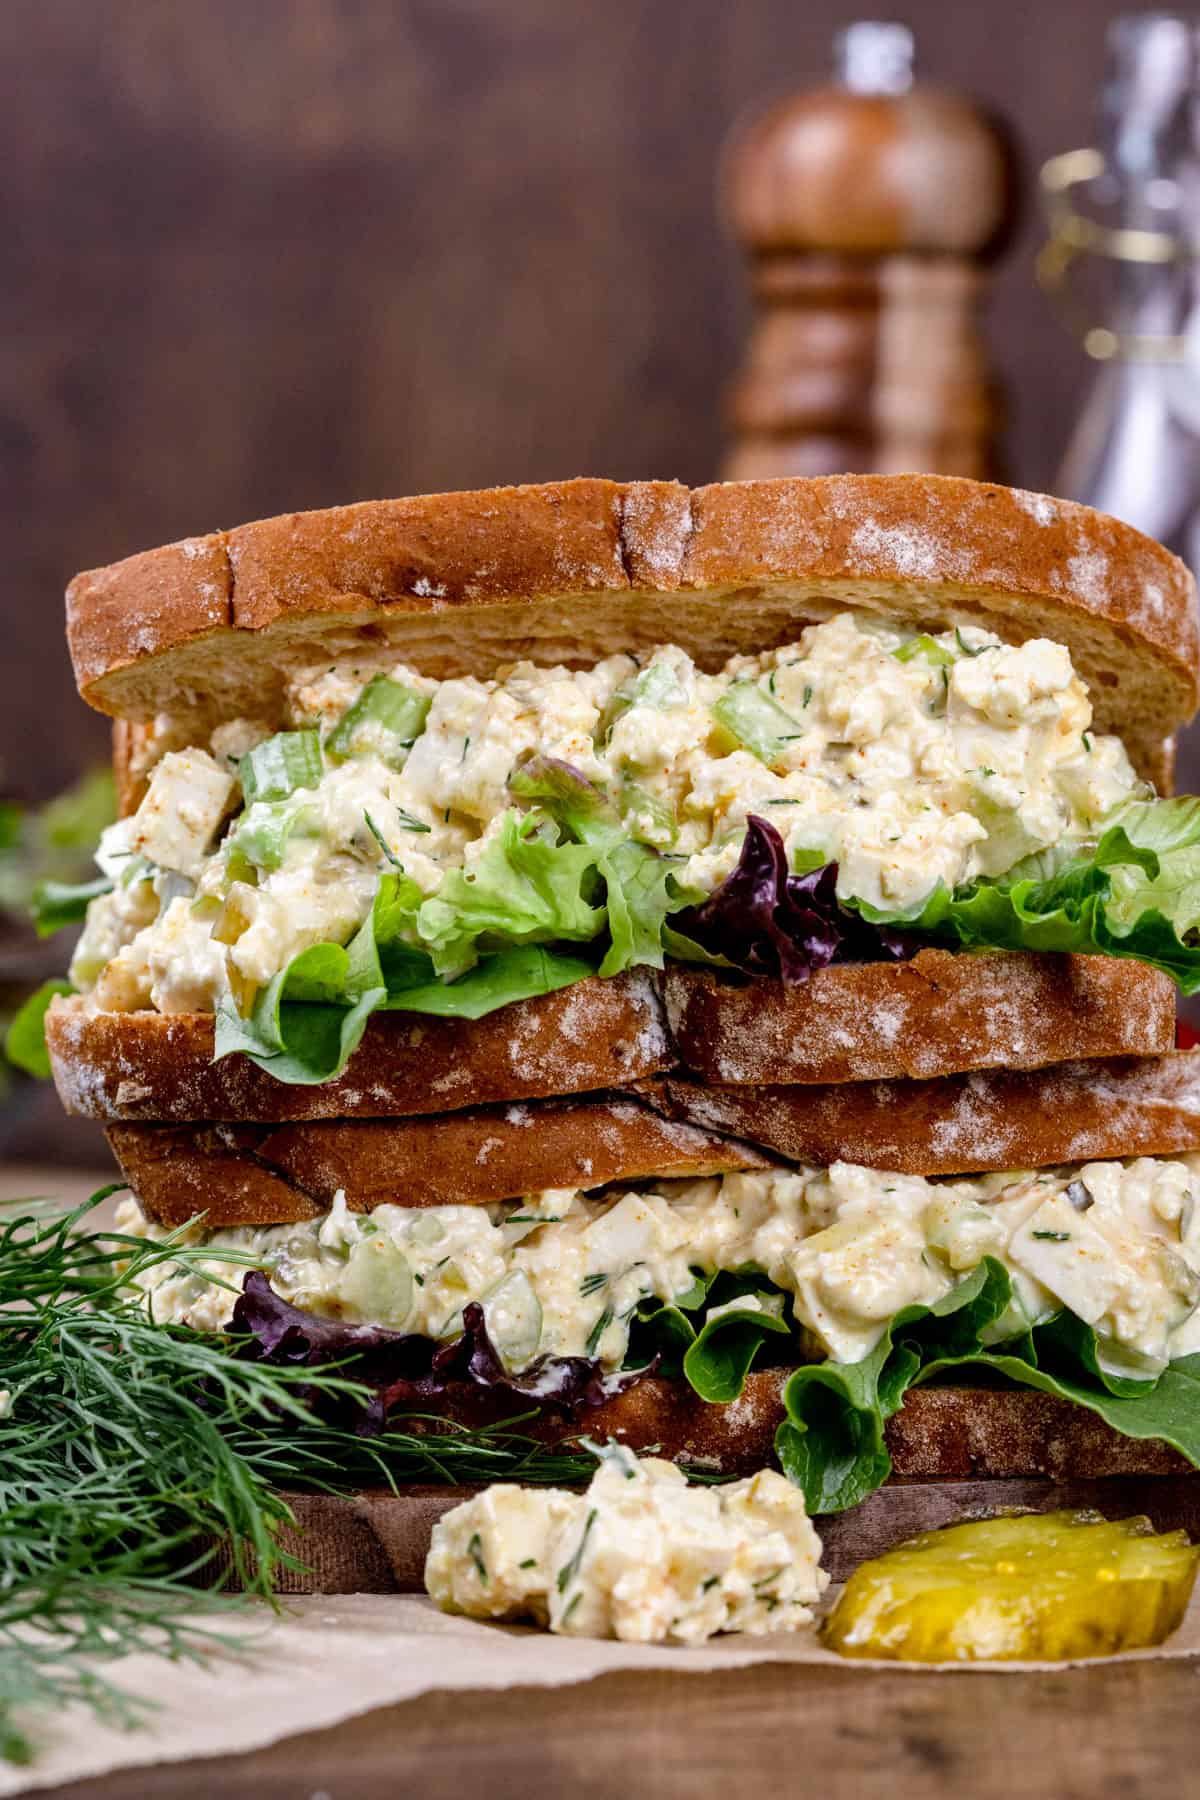 A double stacked sandwich filled with vegan egg salad mixture with lettuce and pickles next to it.